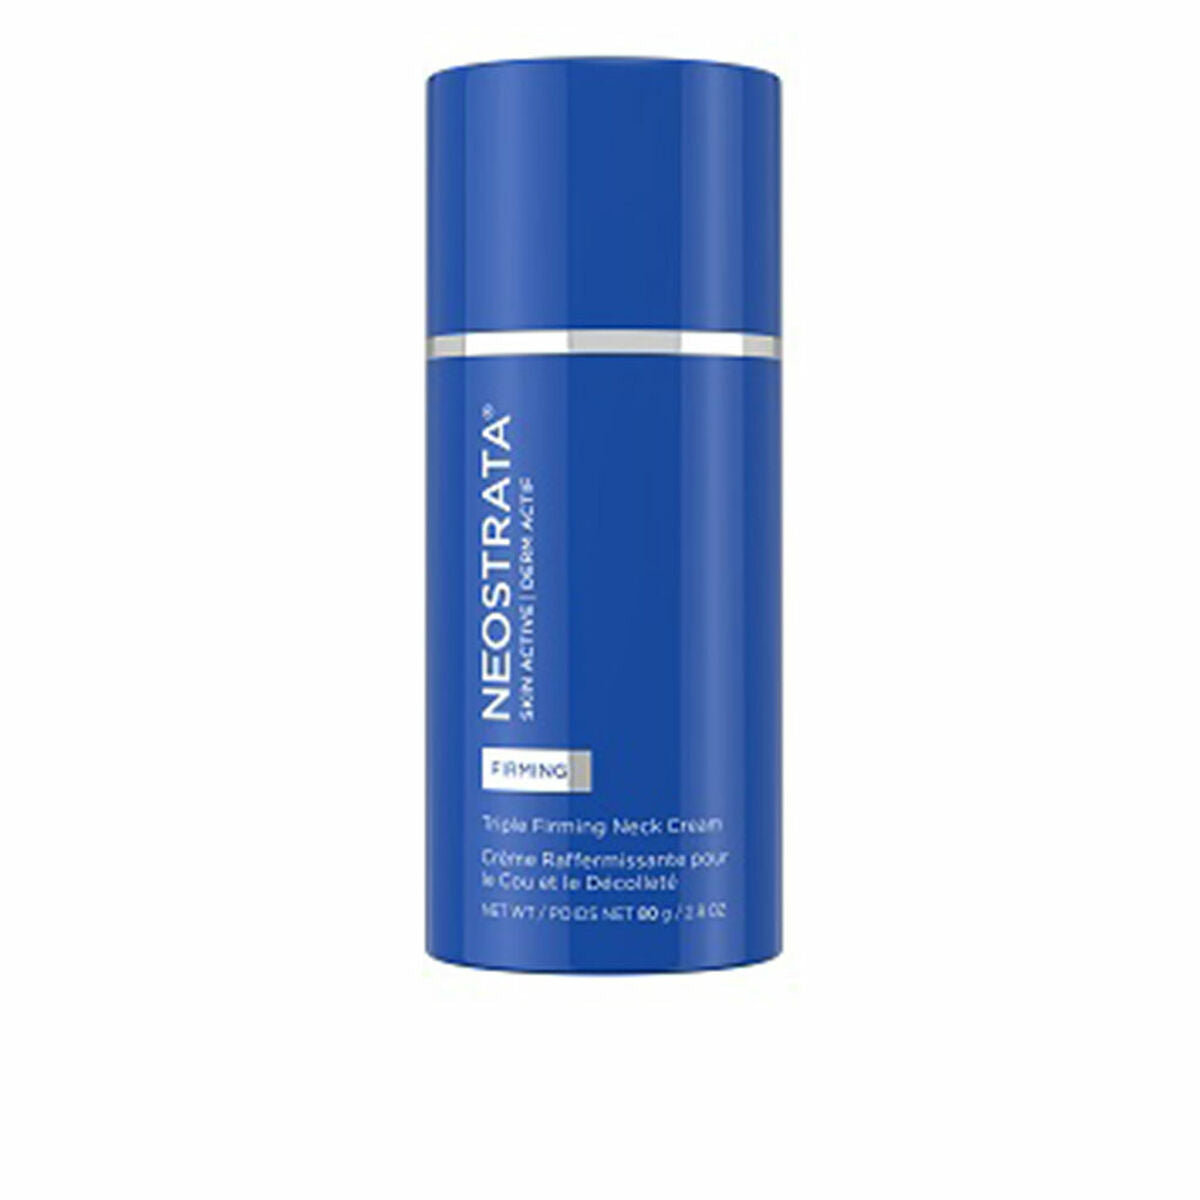 Firming Neck and Décolletage Cream Neostrata Skin Active 80 g-0